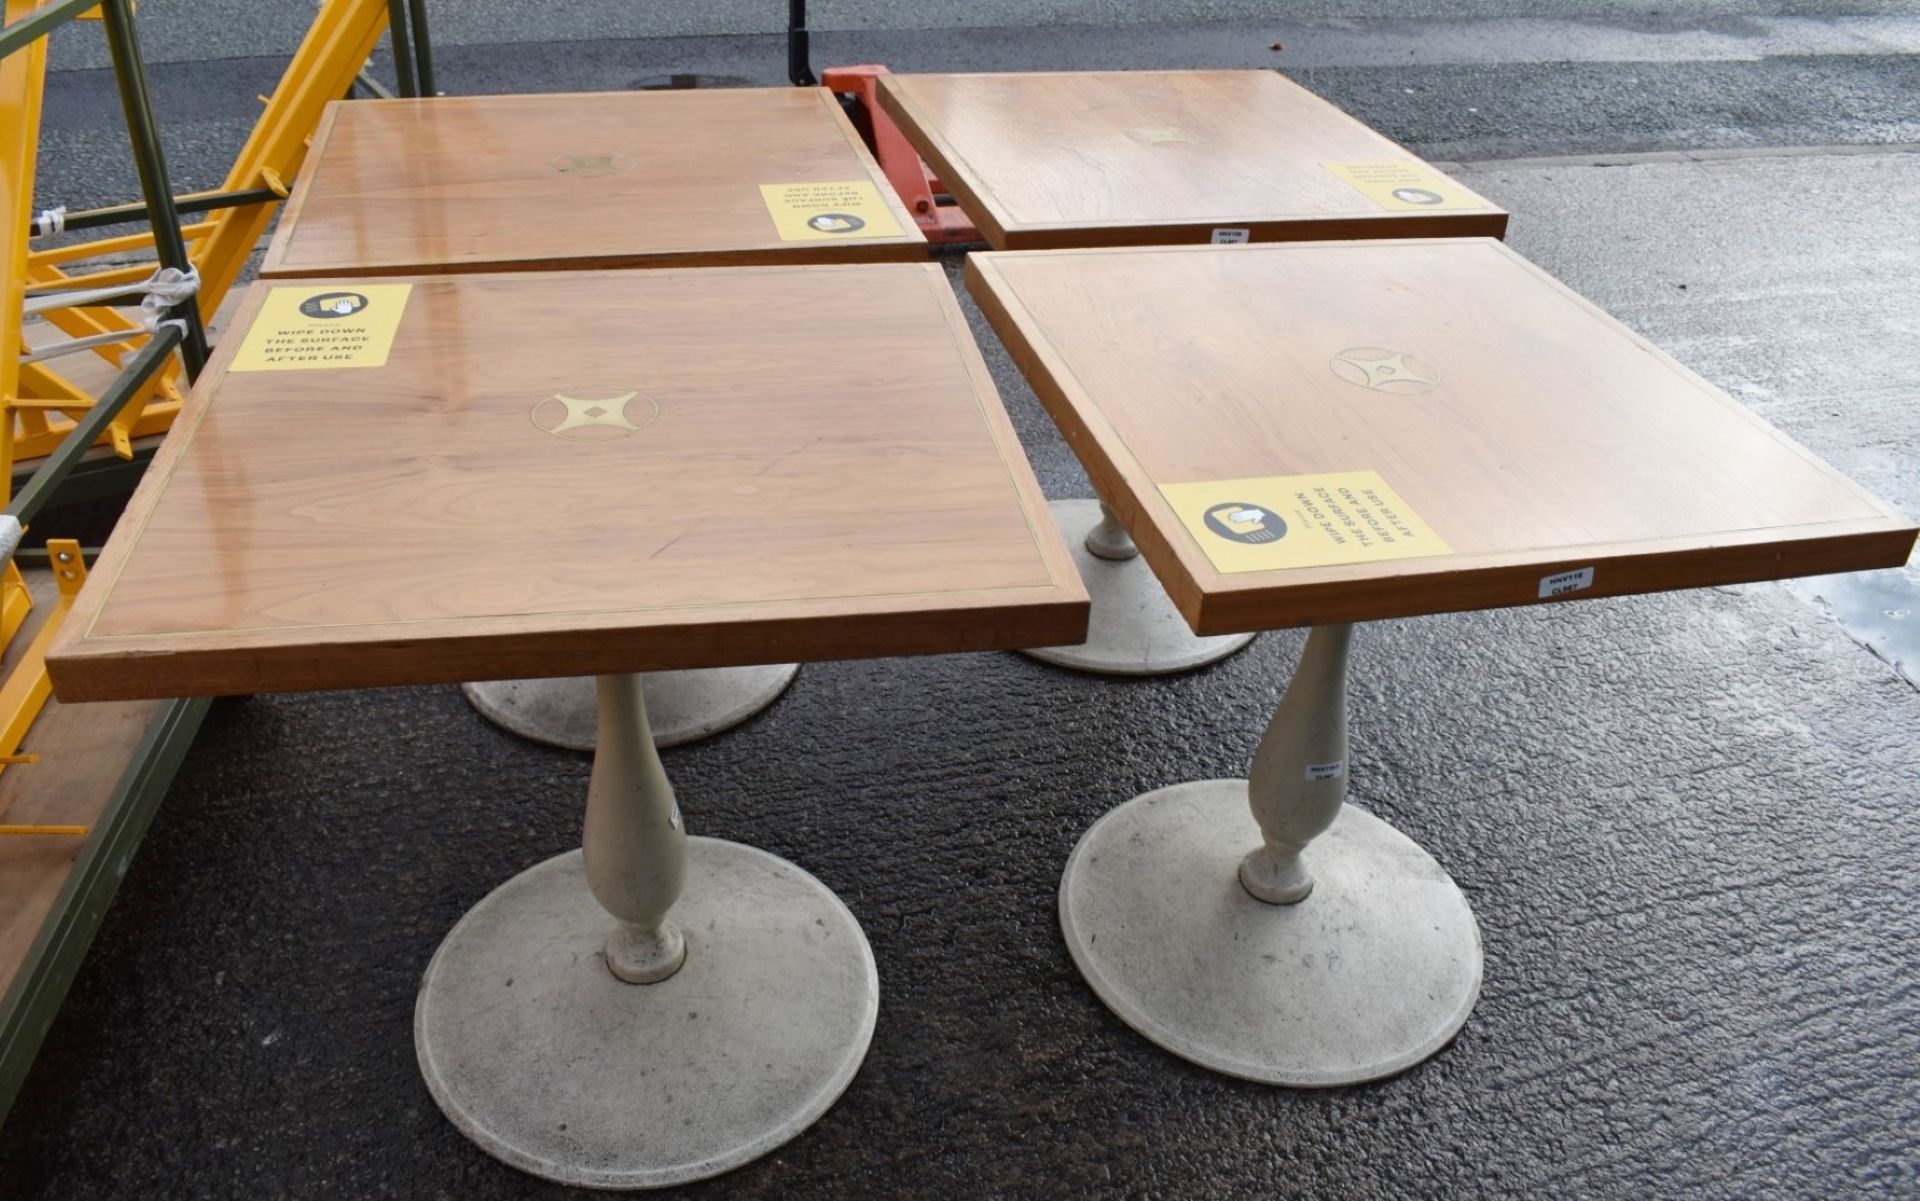 4 x Wooden Topped Bistro Tables Featuring Inlaid Brass Work And Sturdy Metal Bases - Image 2 of 7